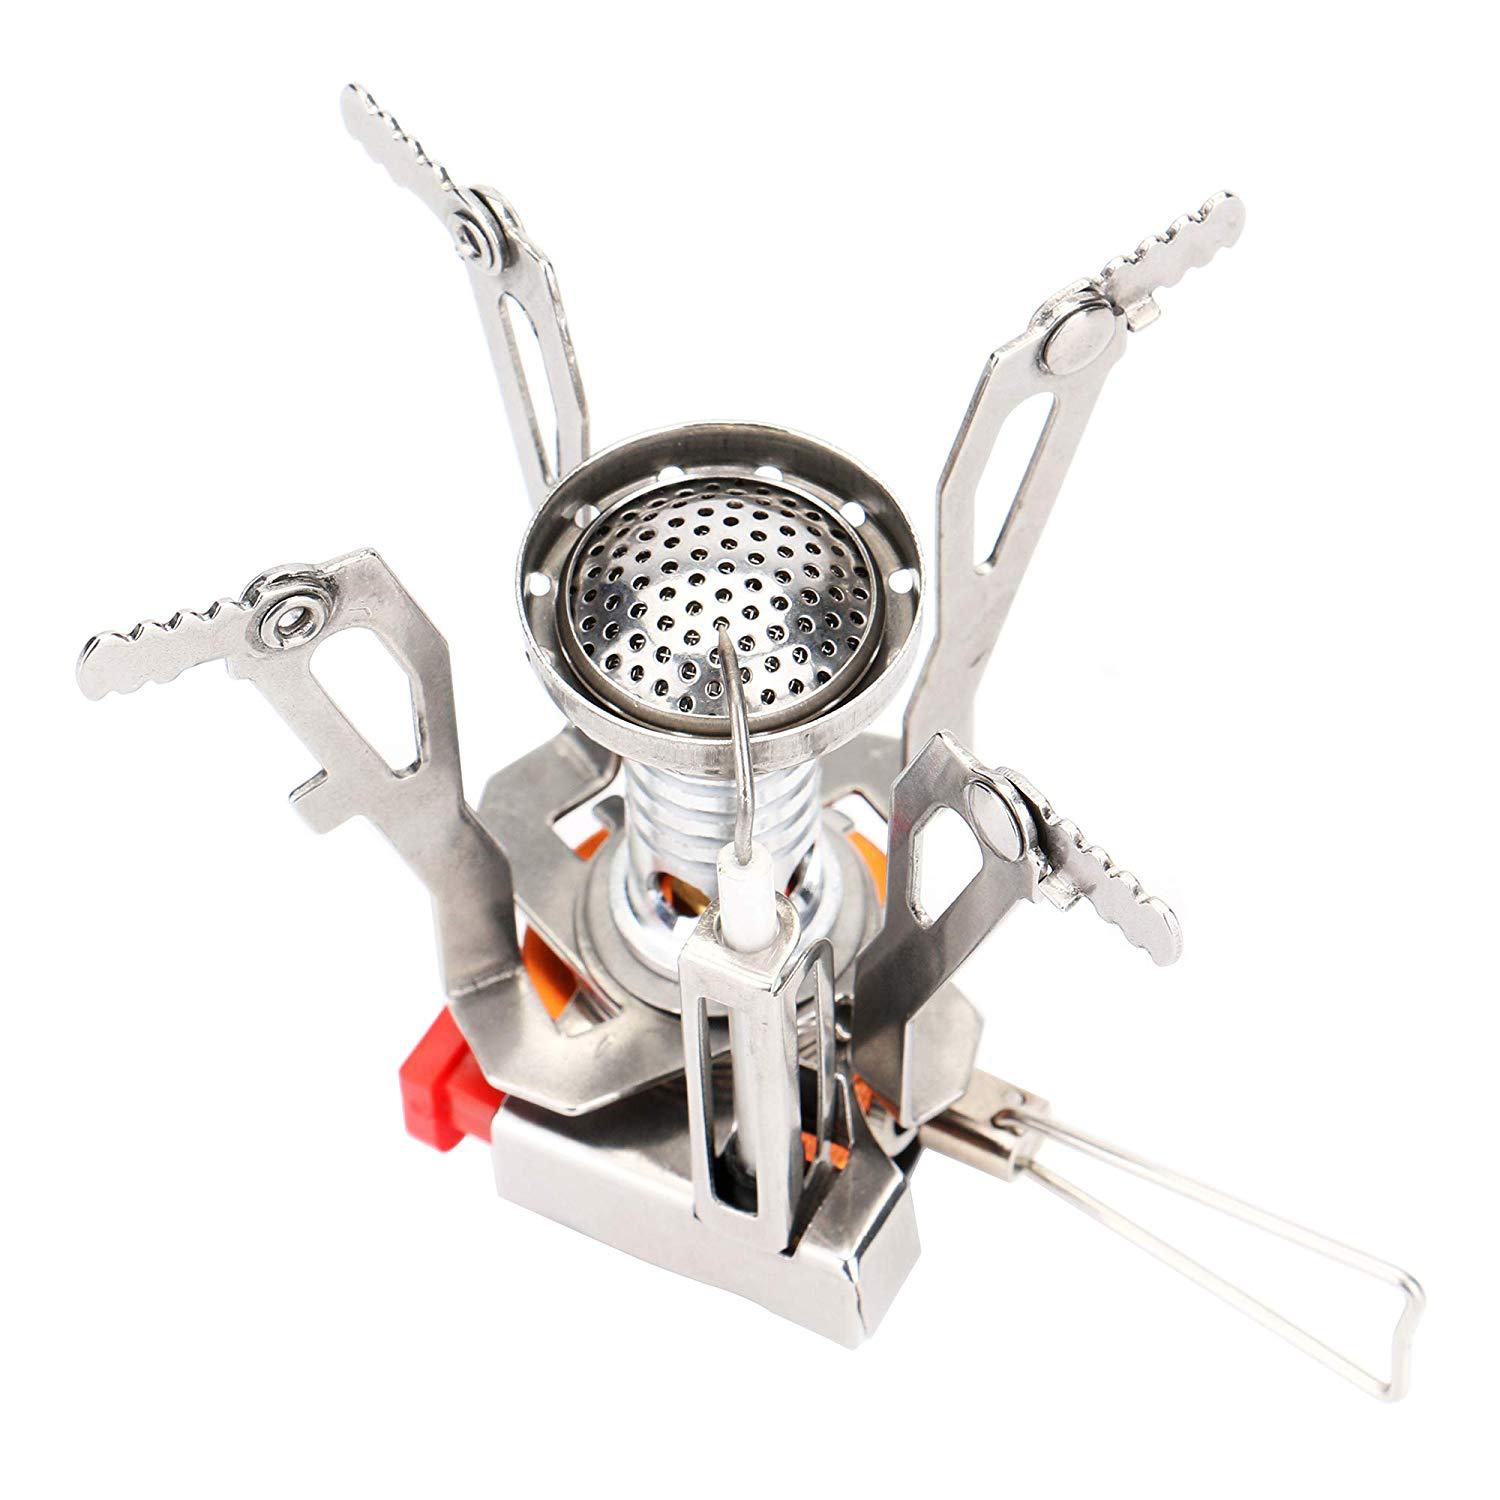 Outdoor Portable Backpacking Stove For Hiking, Camping, Fishing, Hunting